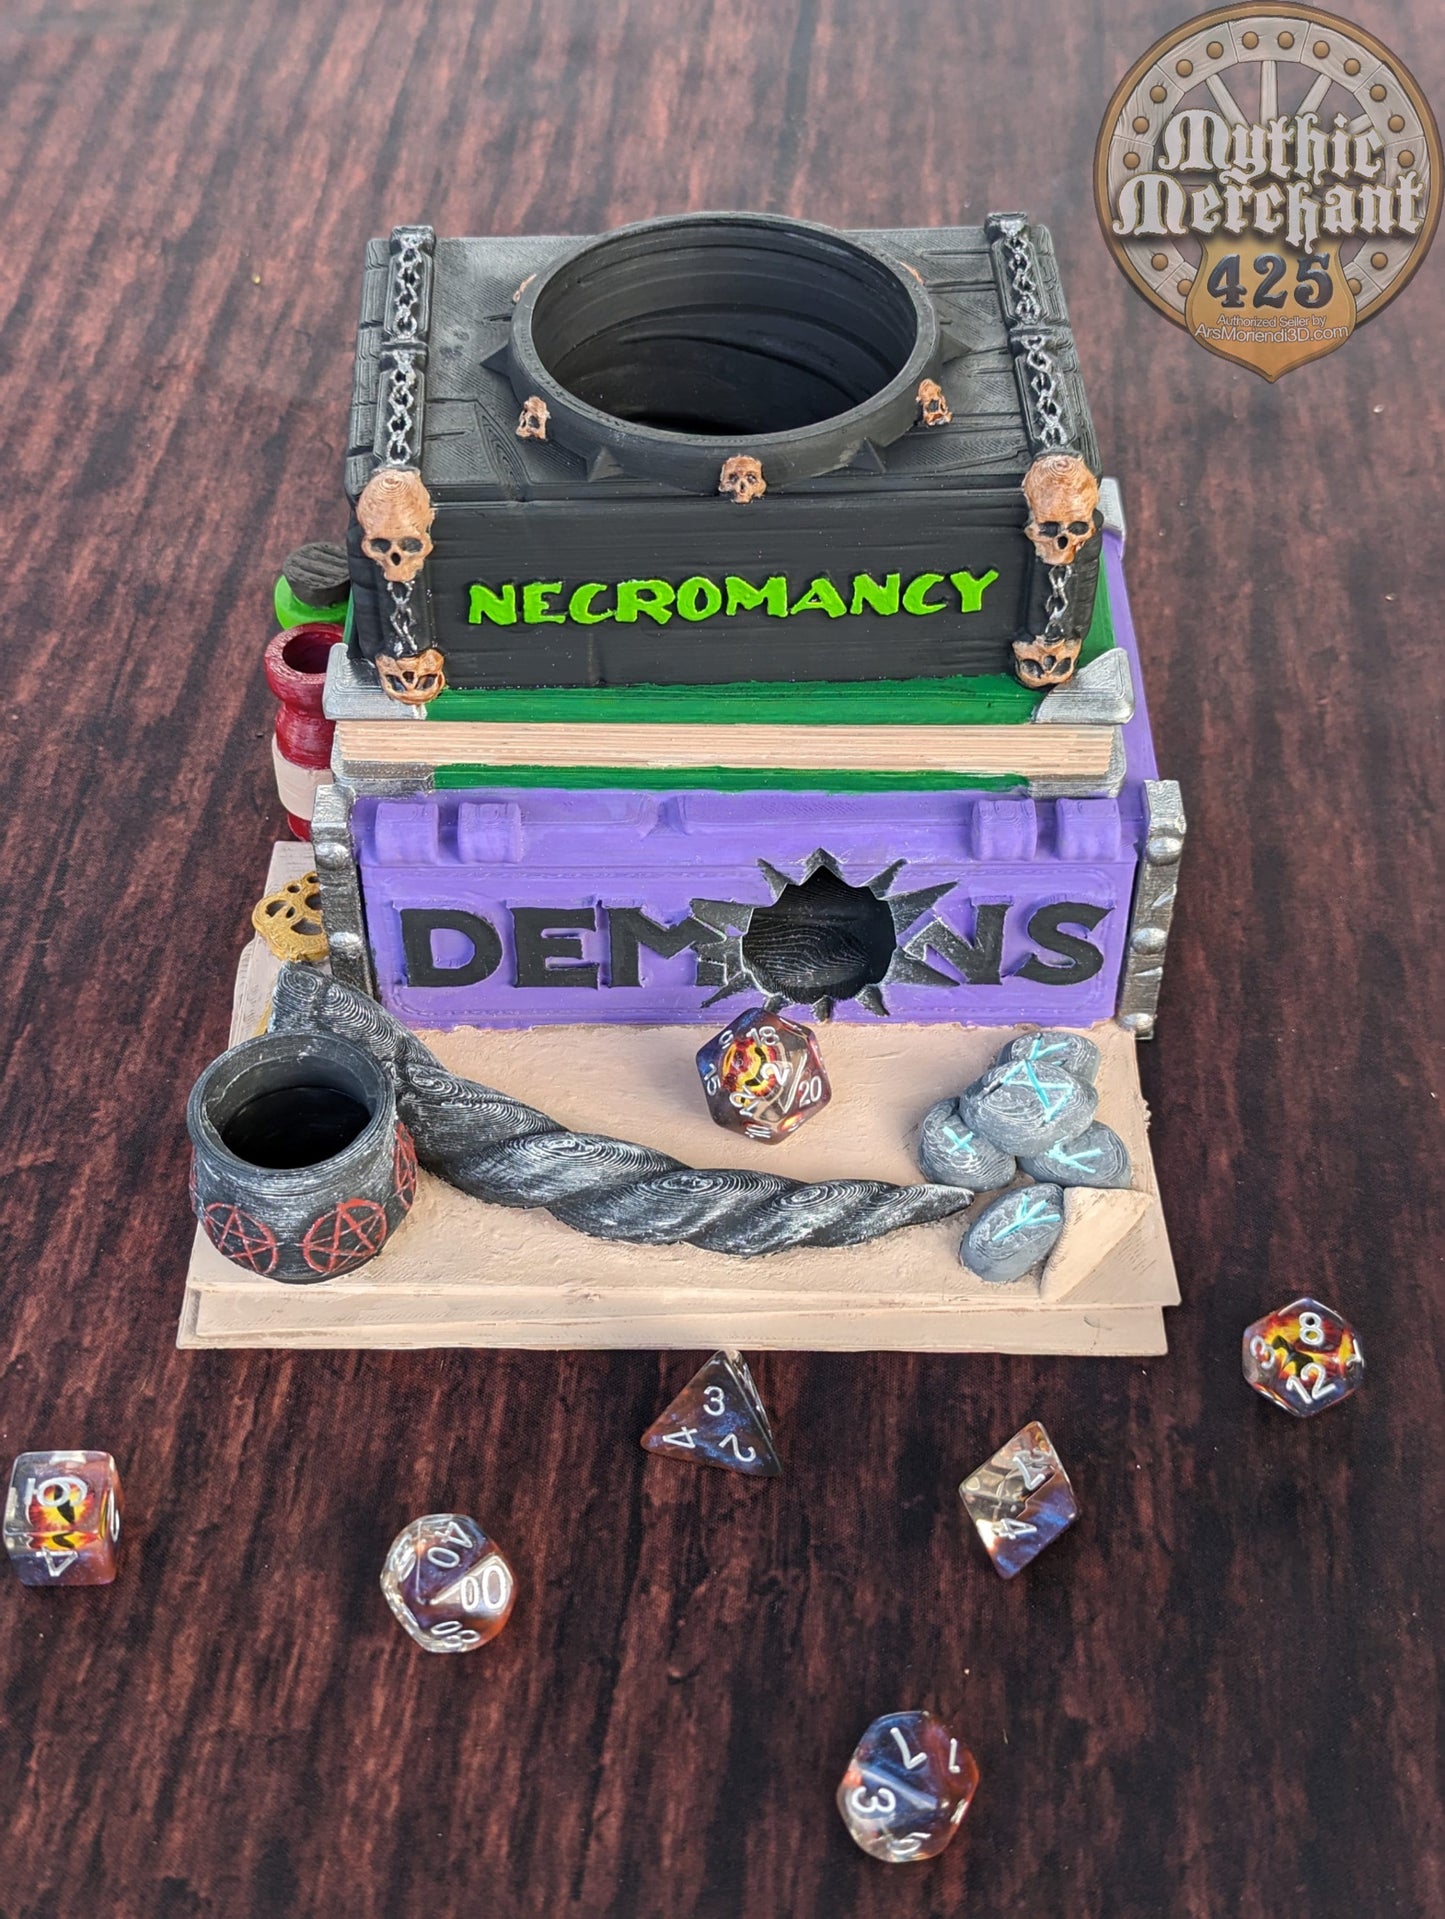 Warlock Spell Book 3D Printed Dice Tower - Mythic Mugs by Ars Moriendi 3D | Dice Tray | D20 Dice Vault - Channel dark magic from the abyss.